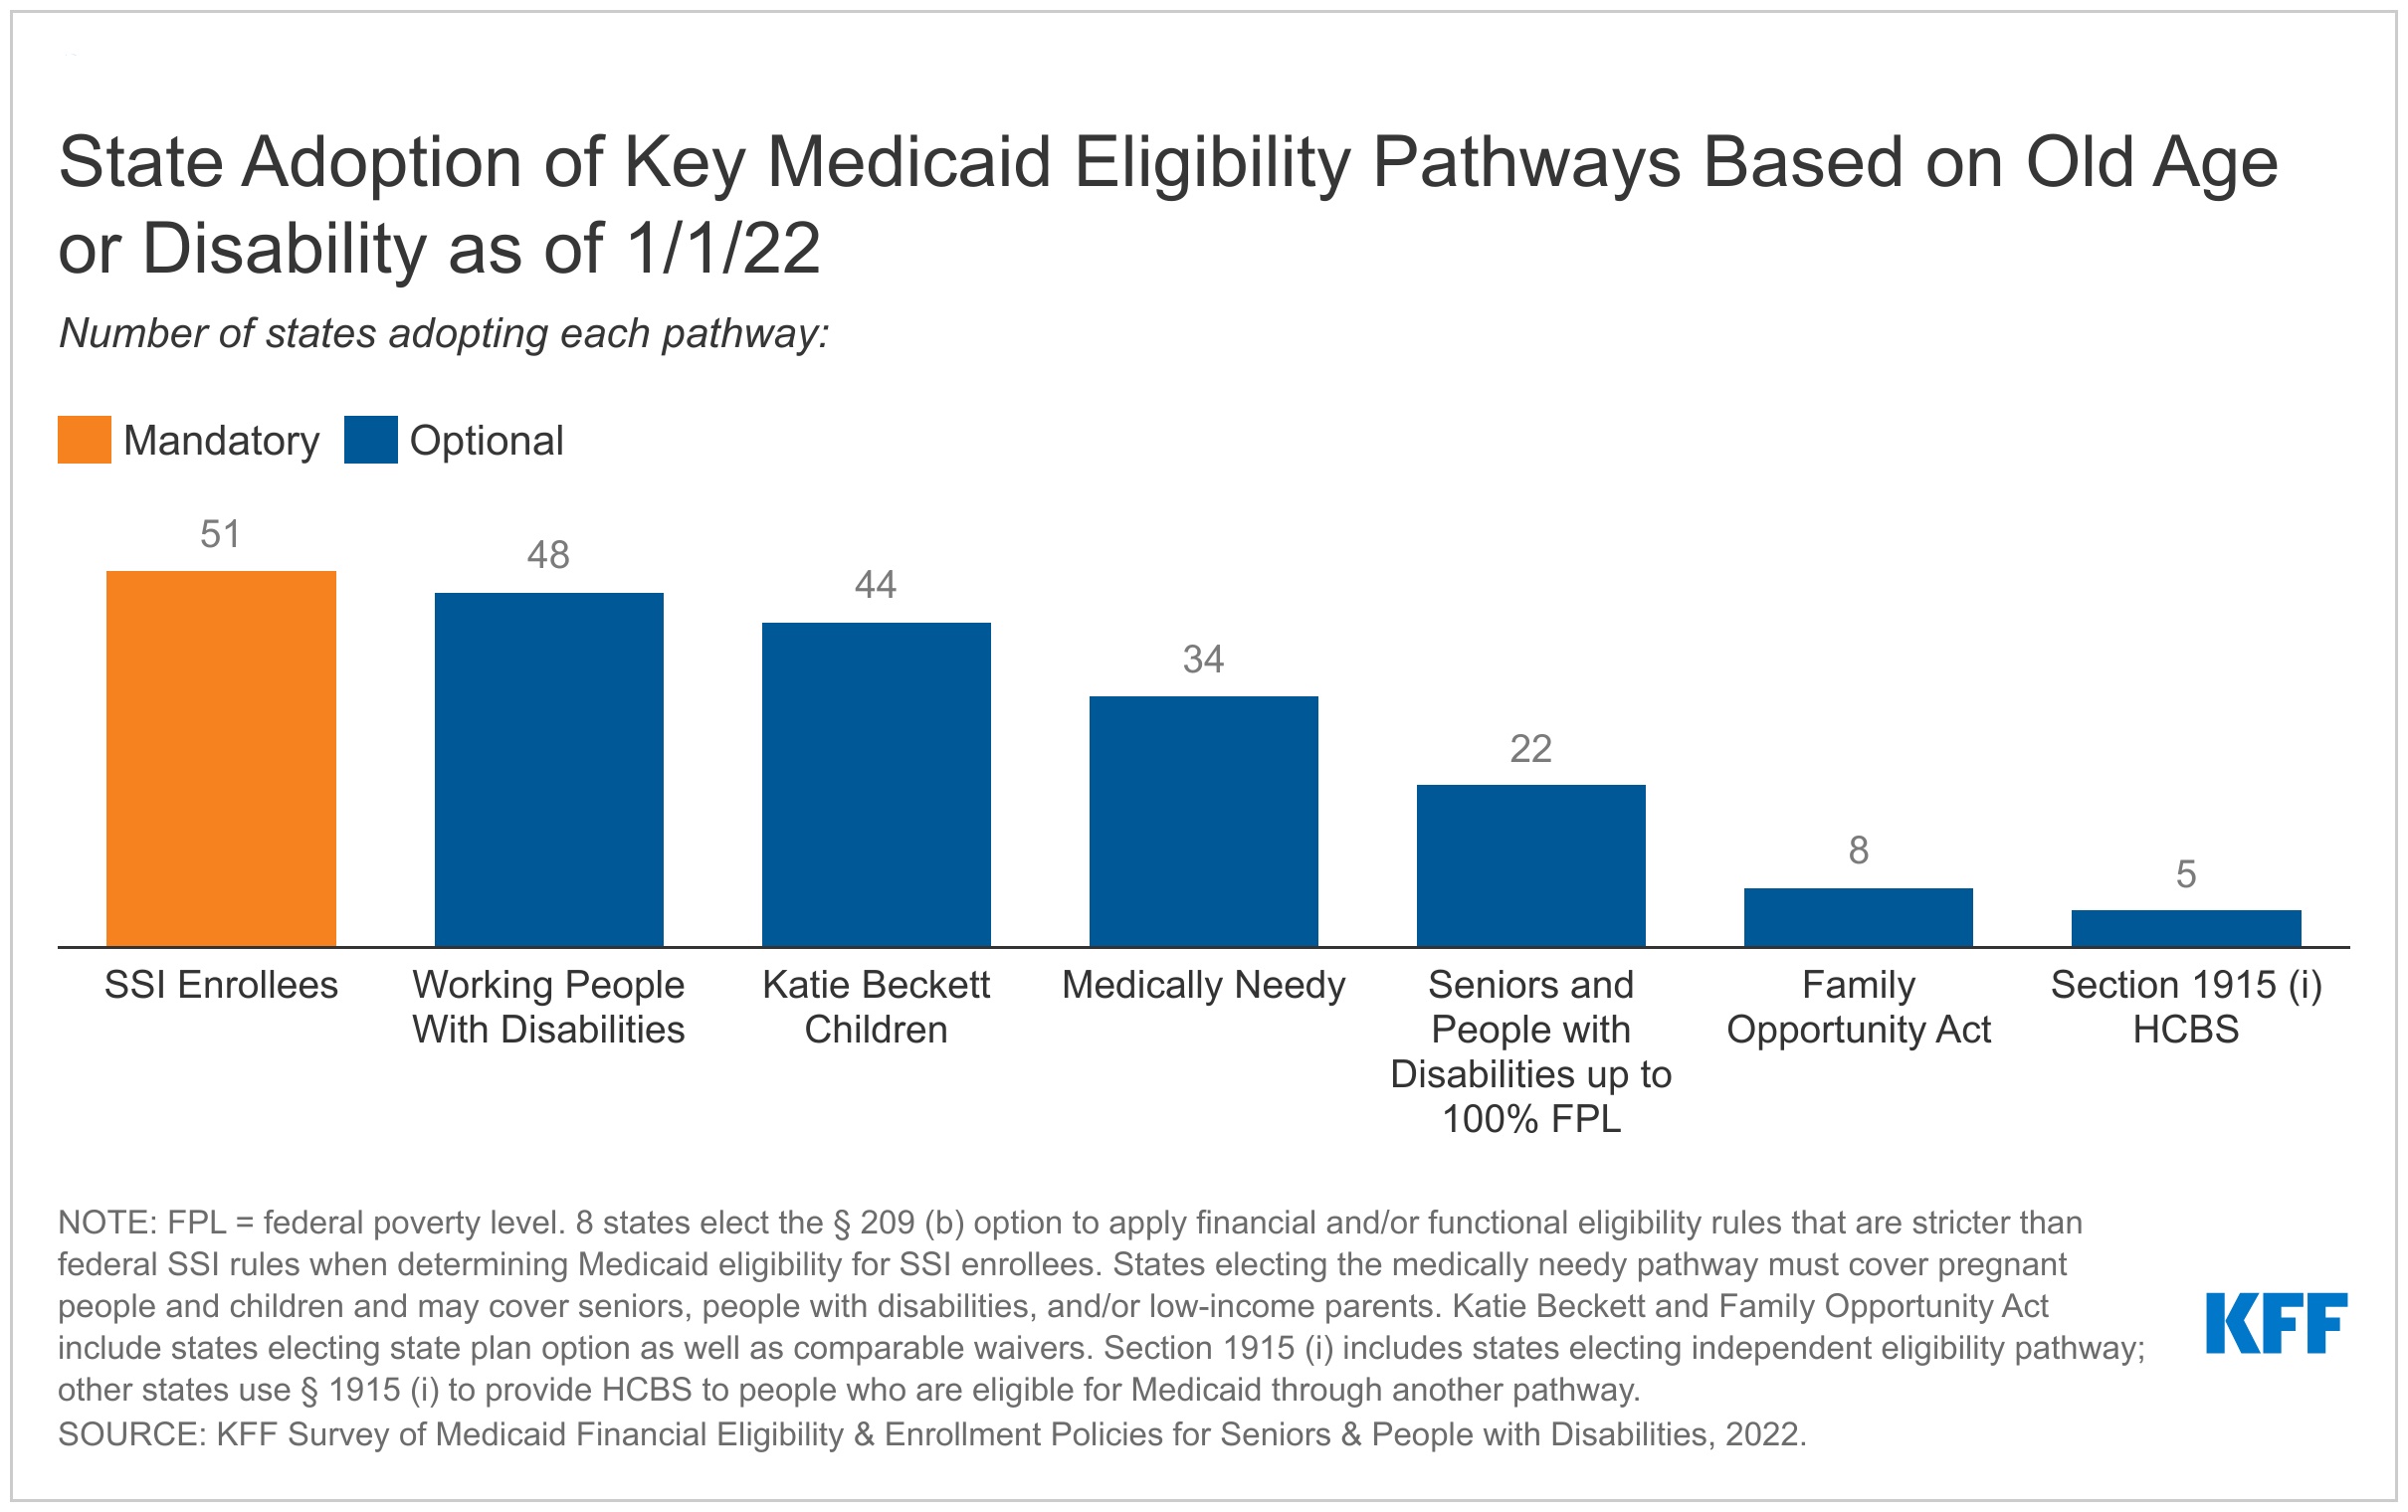 Medicaid Financial Eligibility in Pathways Based on Old Age or